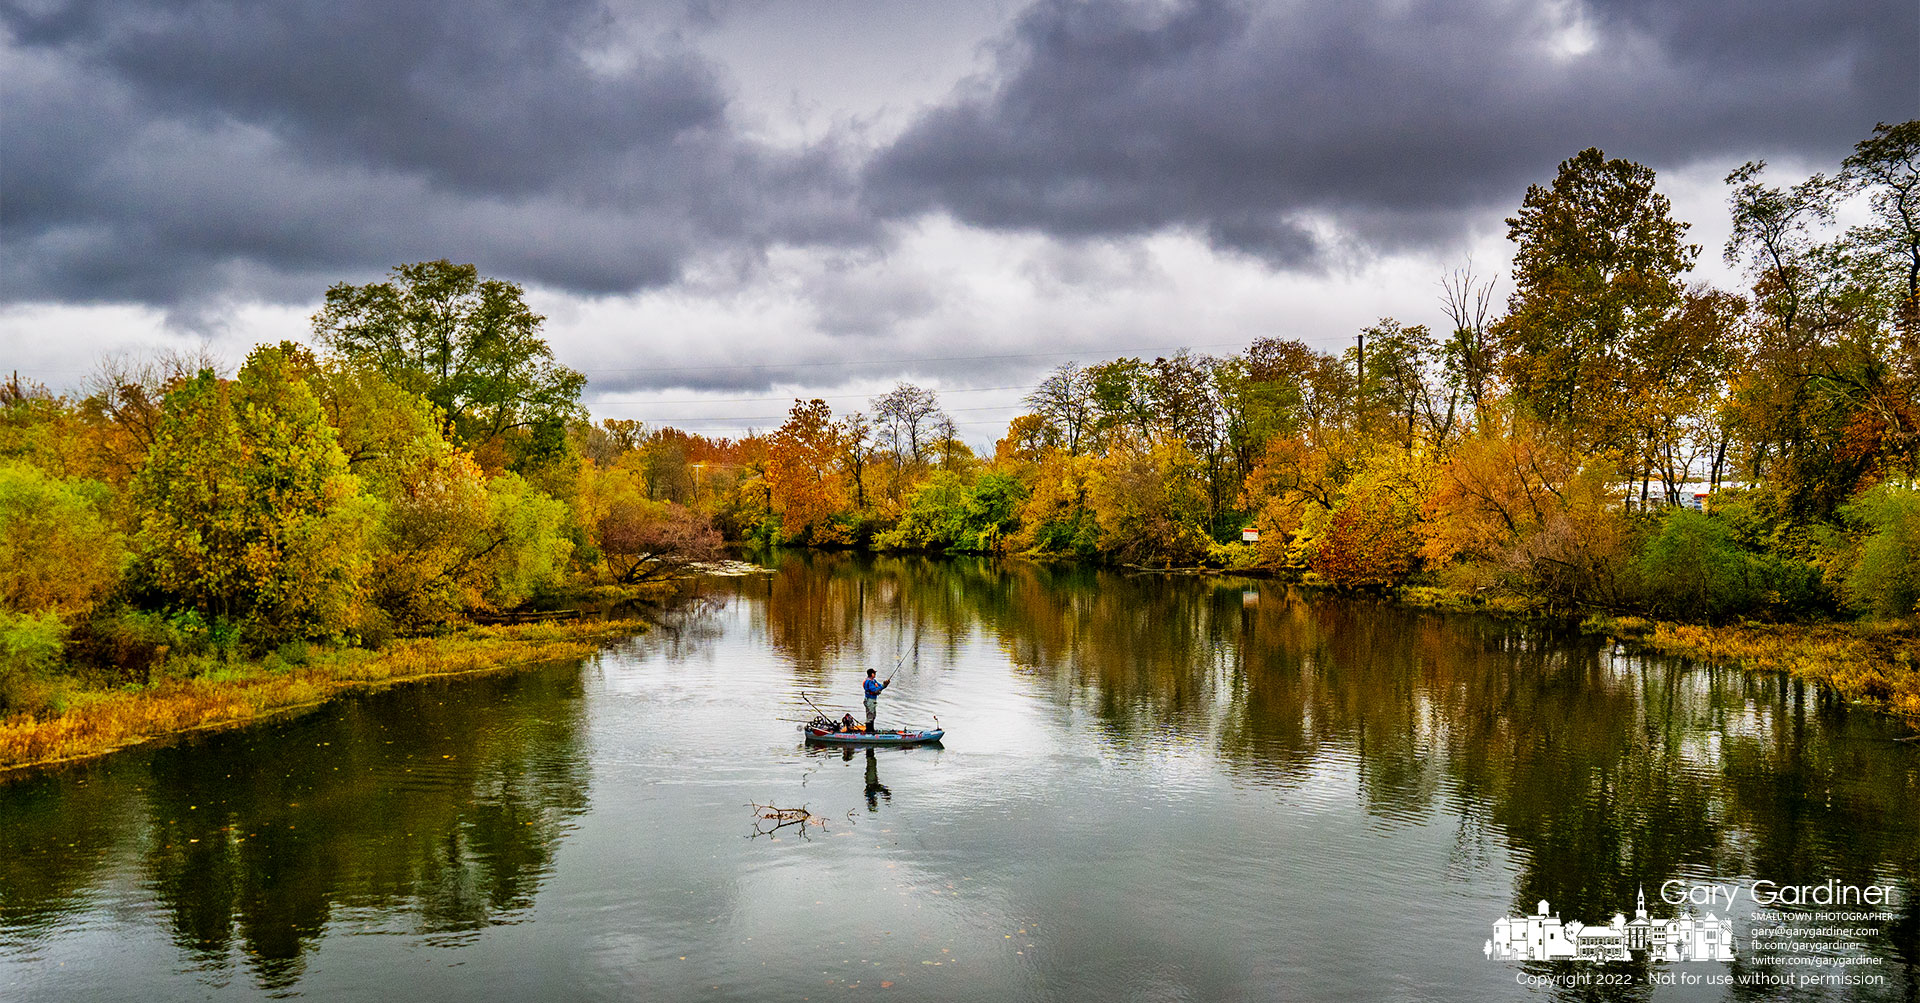 A fisherman casts into the shallows of Alum Creek just below the Main Street bridge in Westerville with hopes the weather and the fish will cooperate in his endeavors. My Final Photo for October 19, 2022.